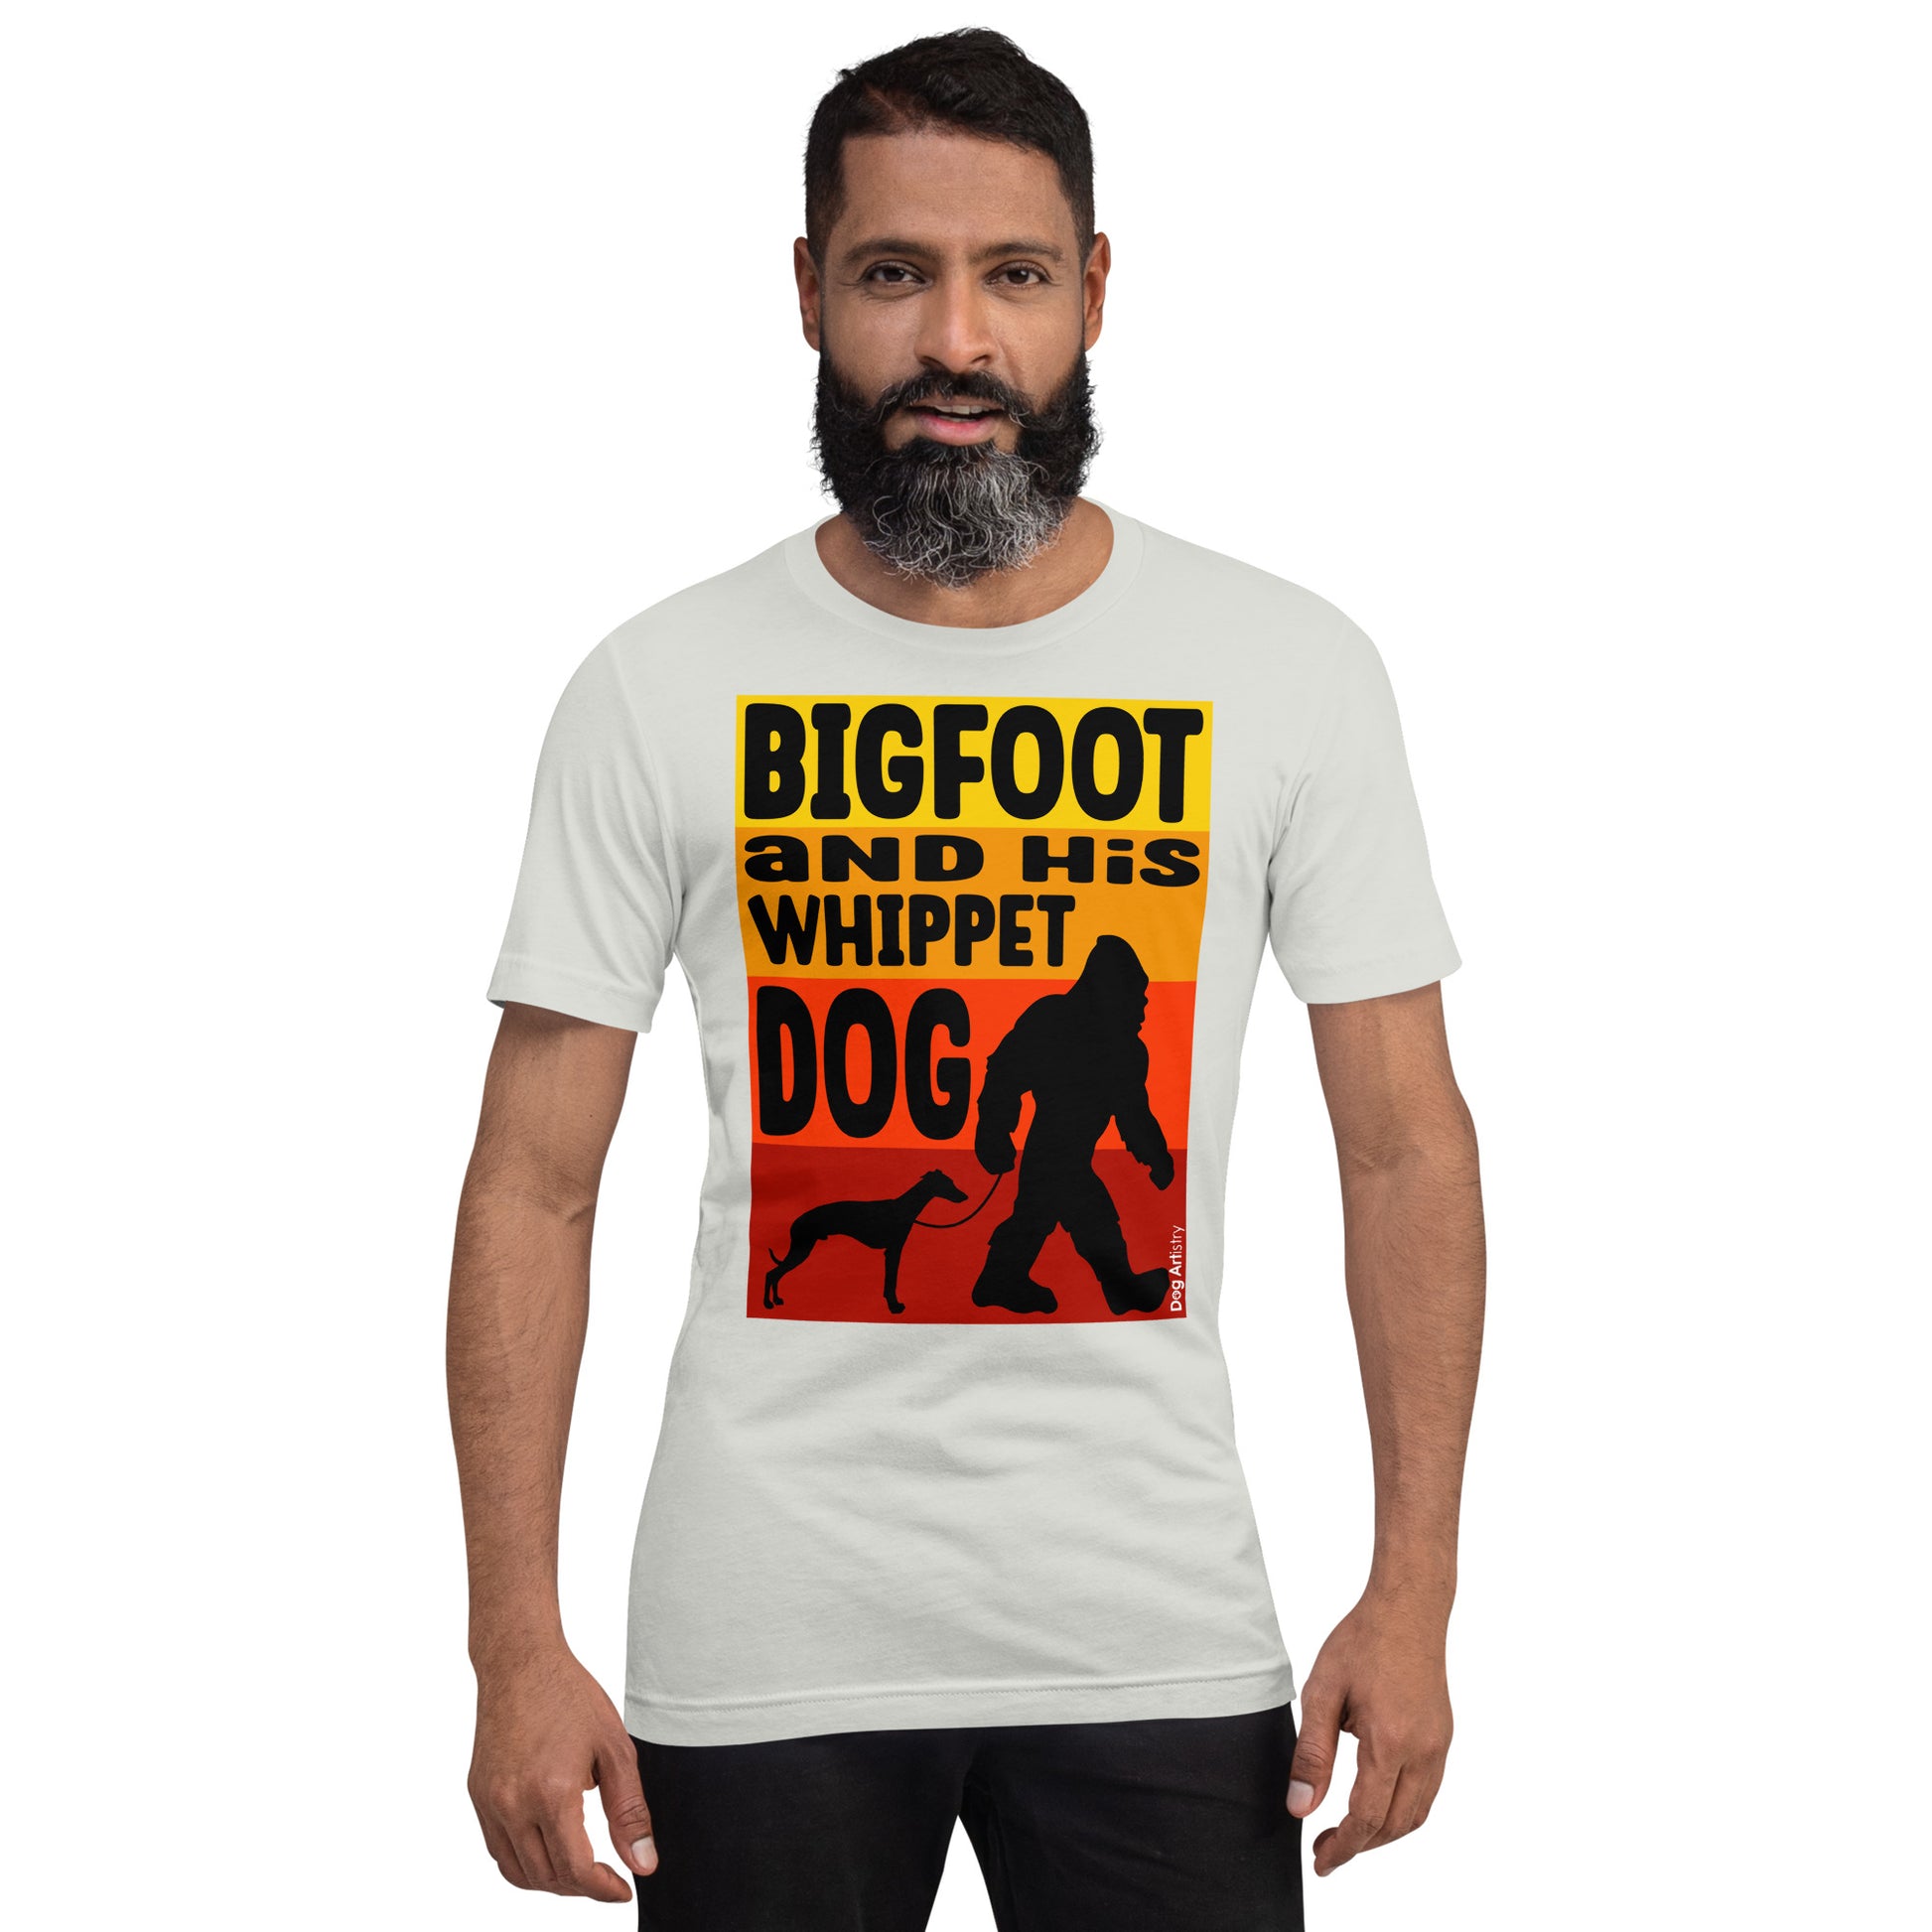 Bigfoot and his Whippet dog unisex silver t-shirt by Dog Artistry.